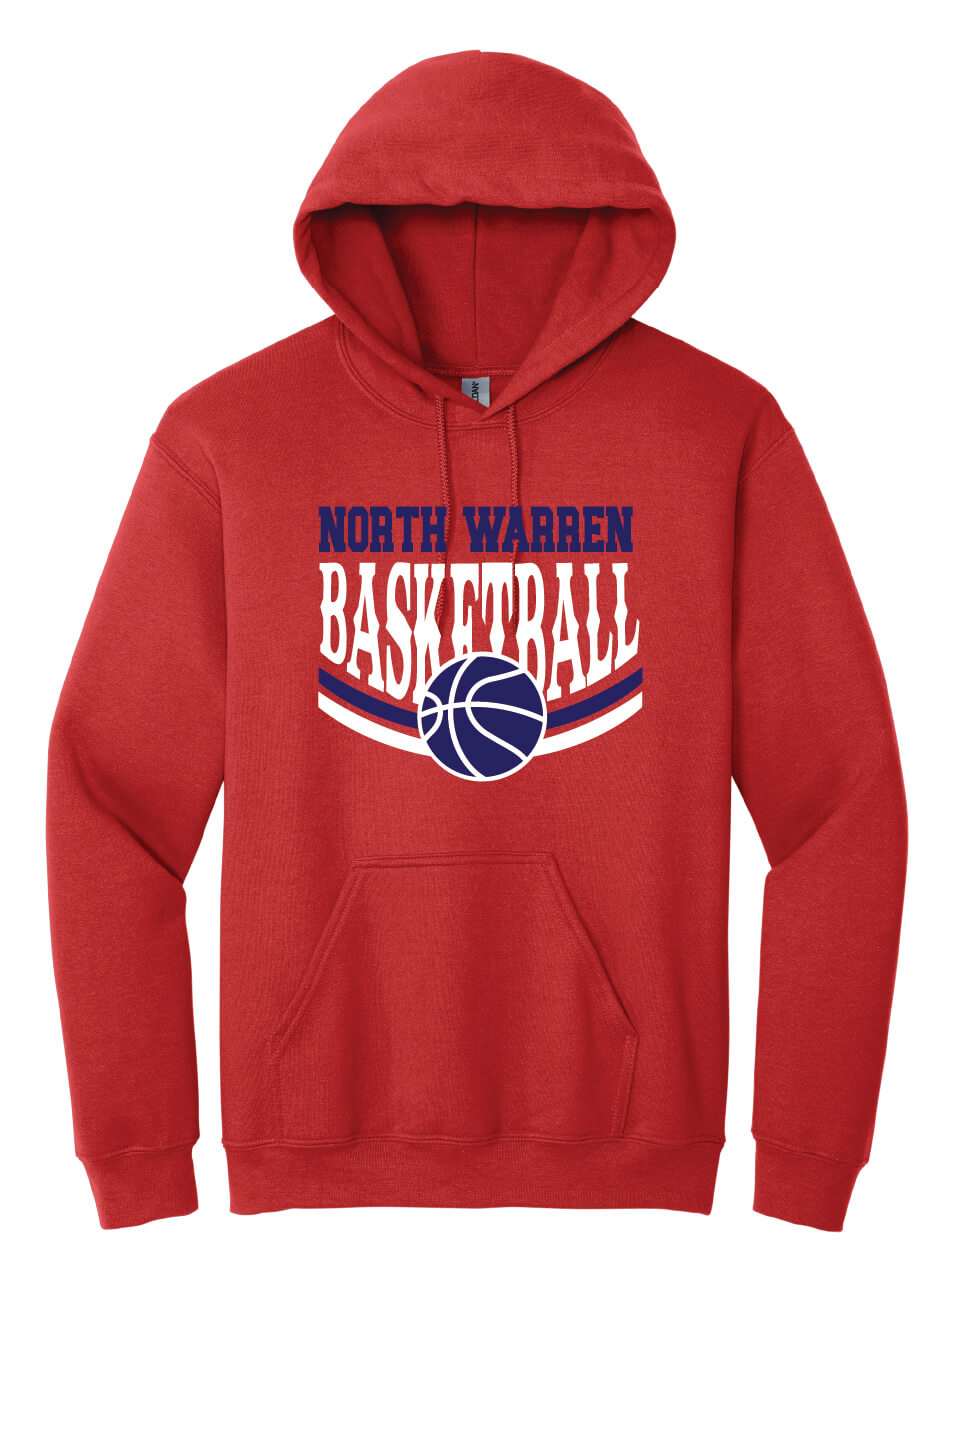 NW Basketball Hoodie (Youth) red